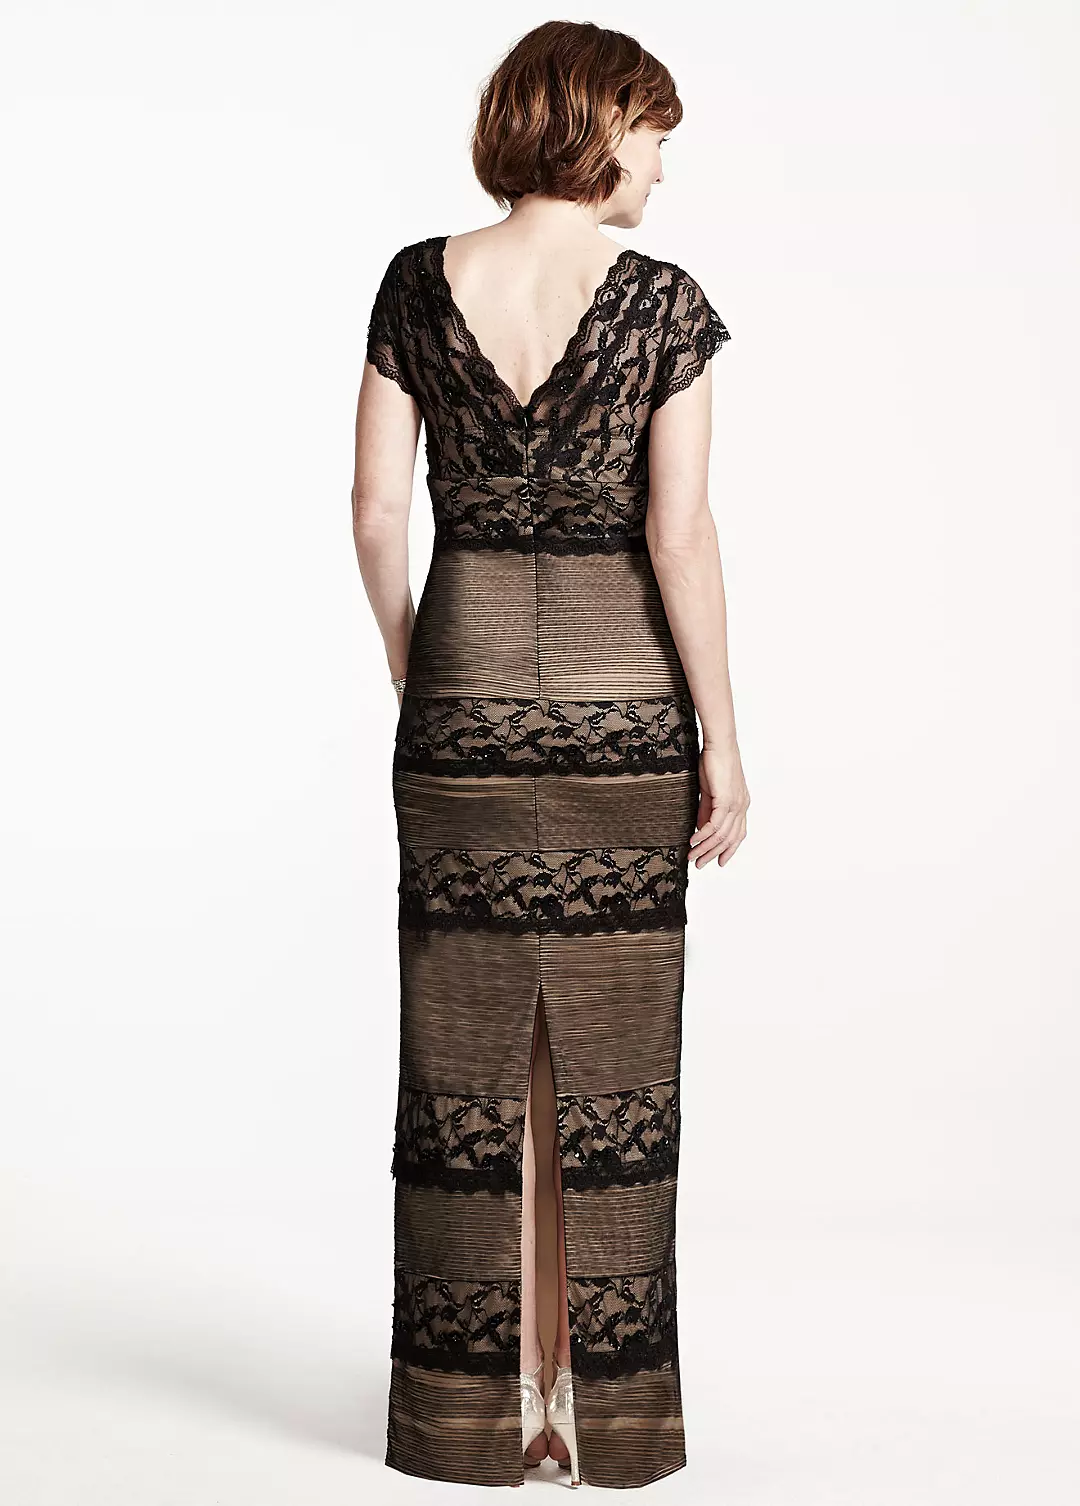 Long Beaded Stretch Lace Dress with Cap Sleeves Image 2